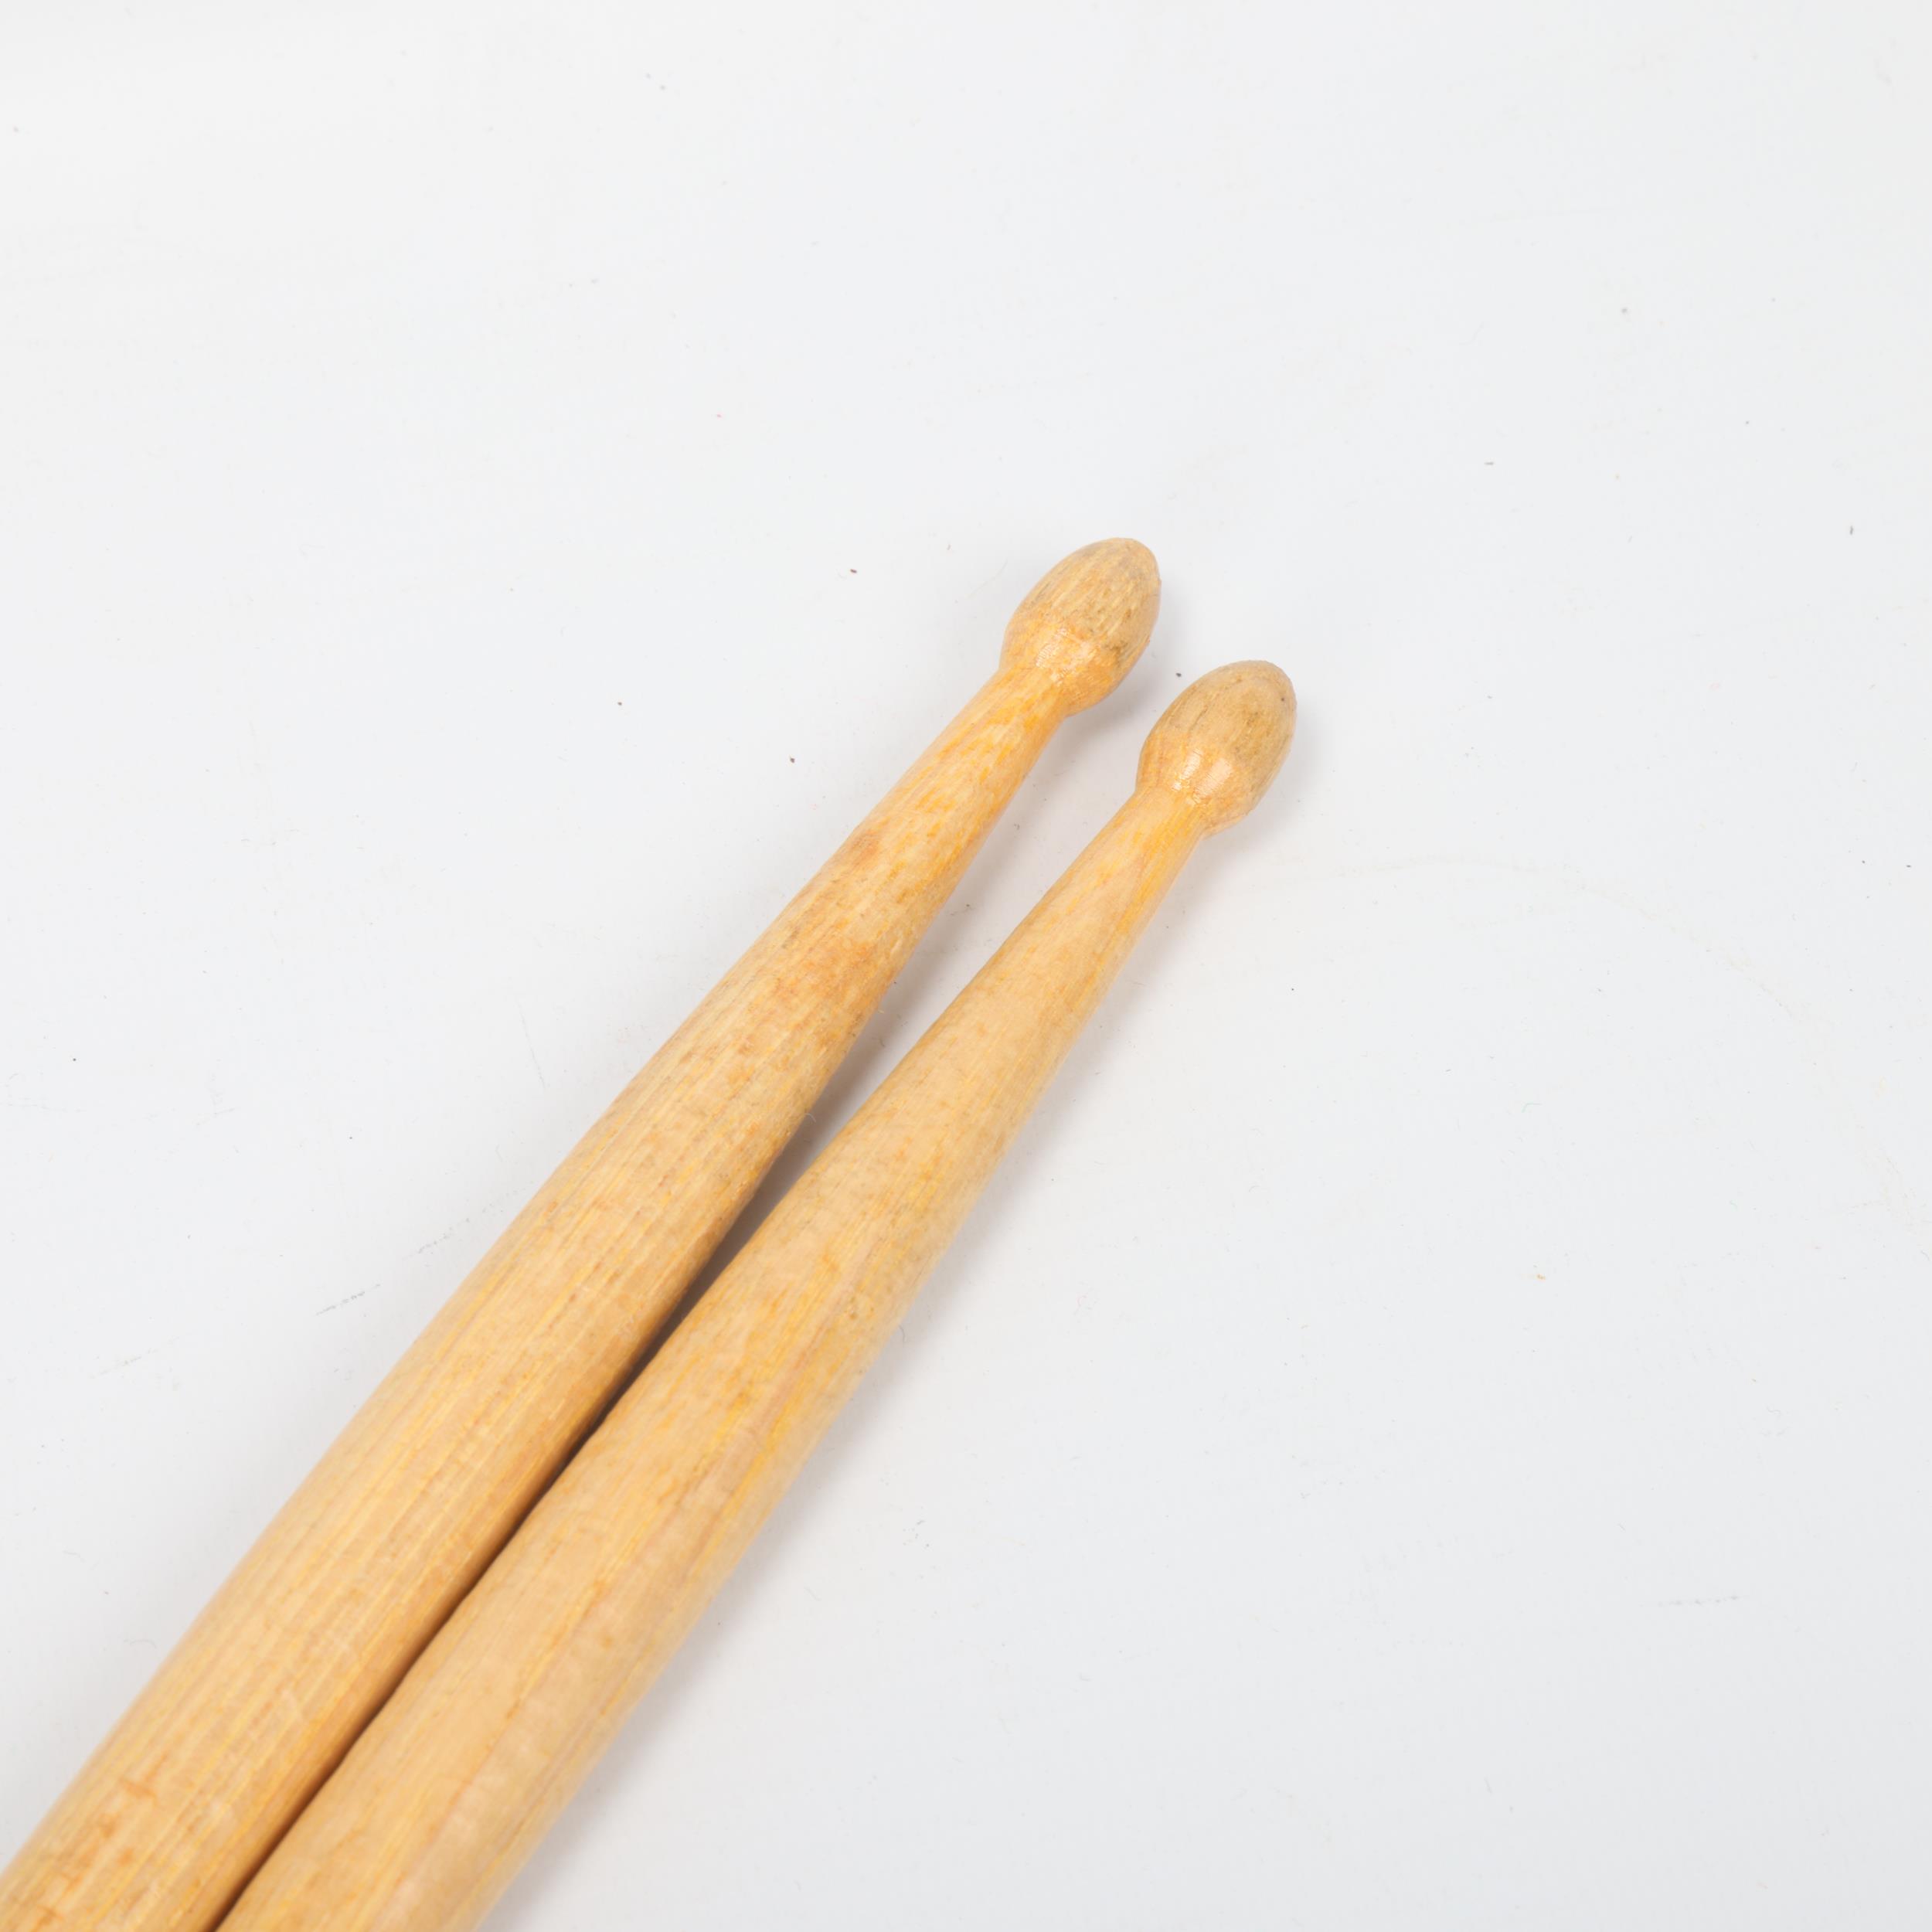 Two USED CALATO 'REGAL 5B' Hickory DRUMSTICKS belonging to MITCH MITCHELL. - Image 3 of 3